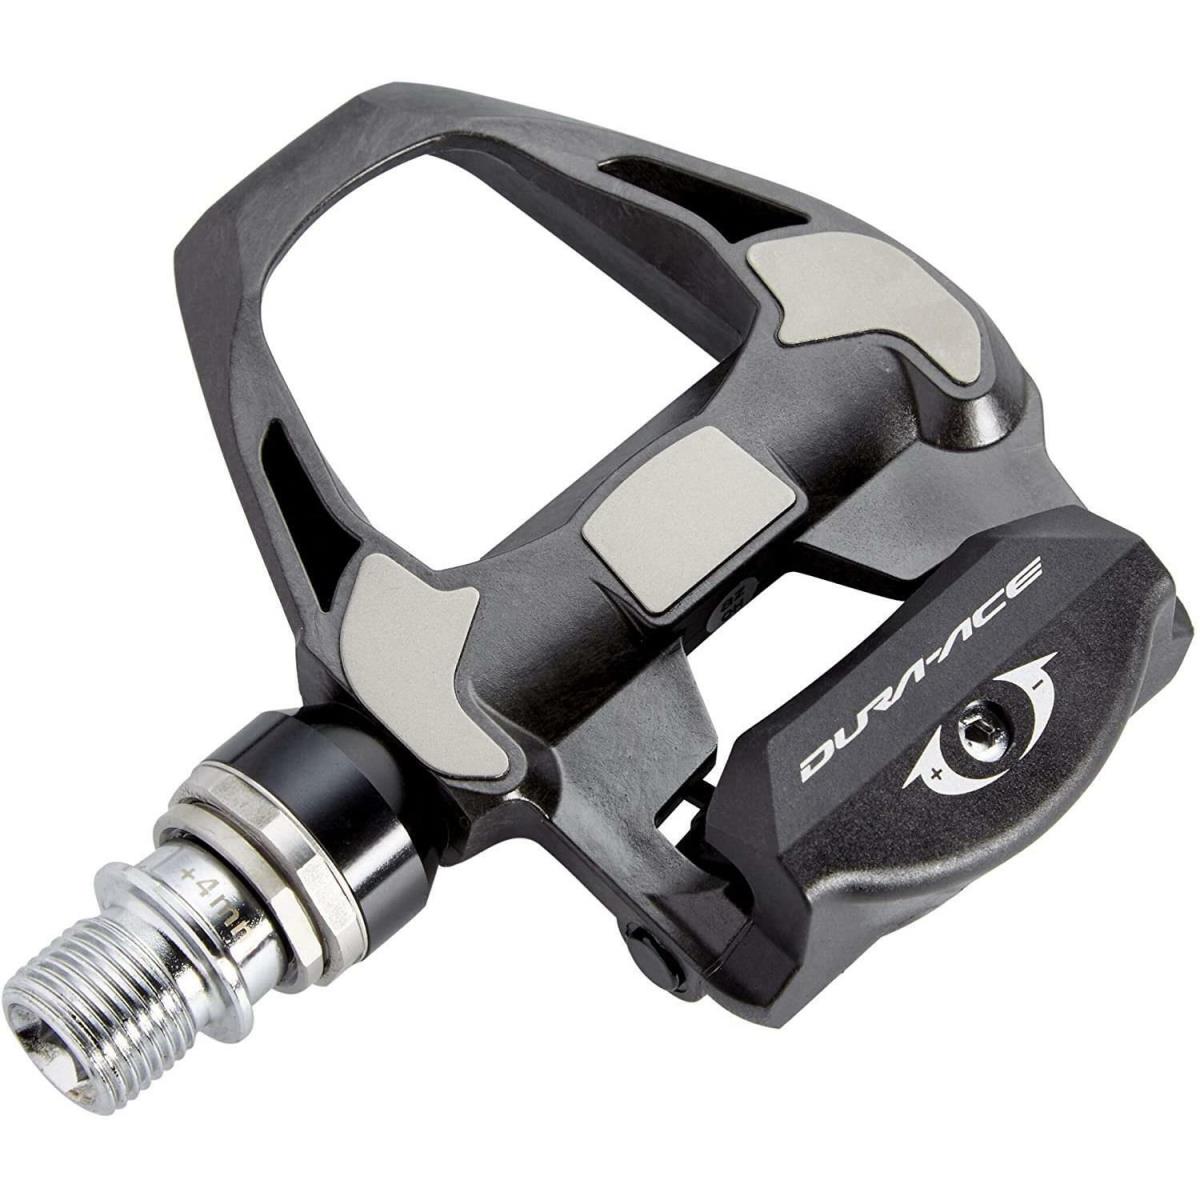 Shimano Dura-ace PD-R9100E1 +4-mm Axle Carbon Pedal Road Bike Clipless